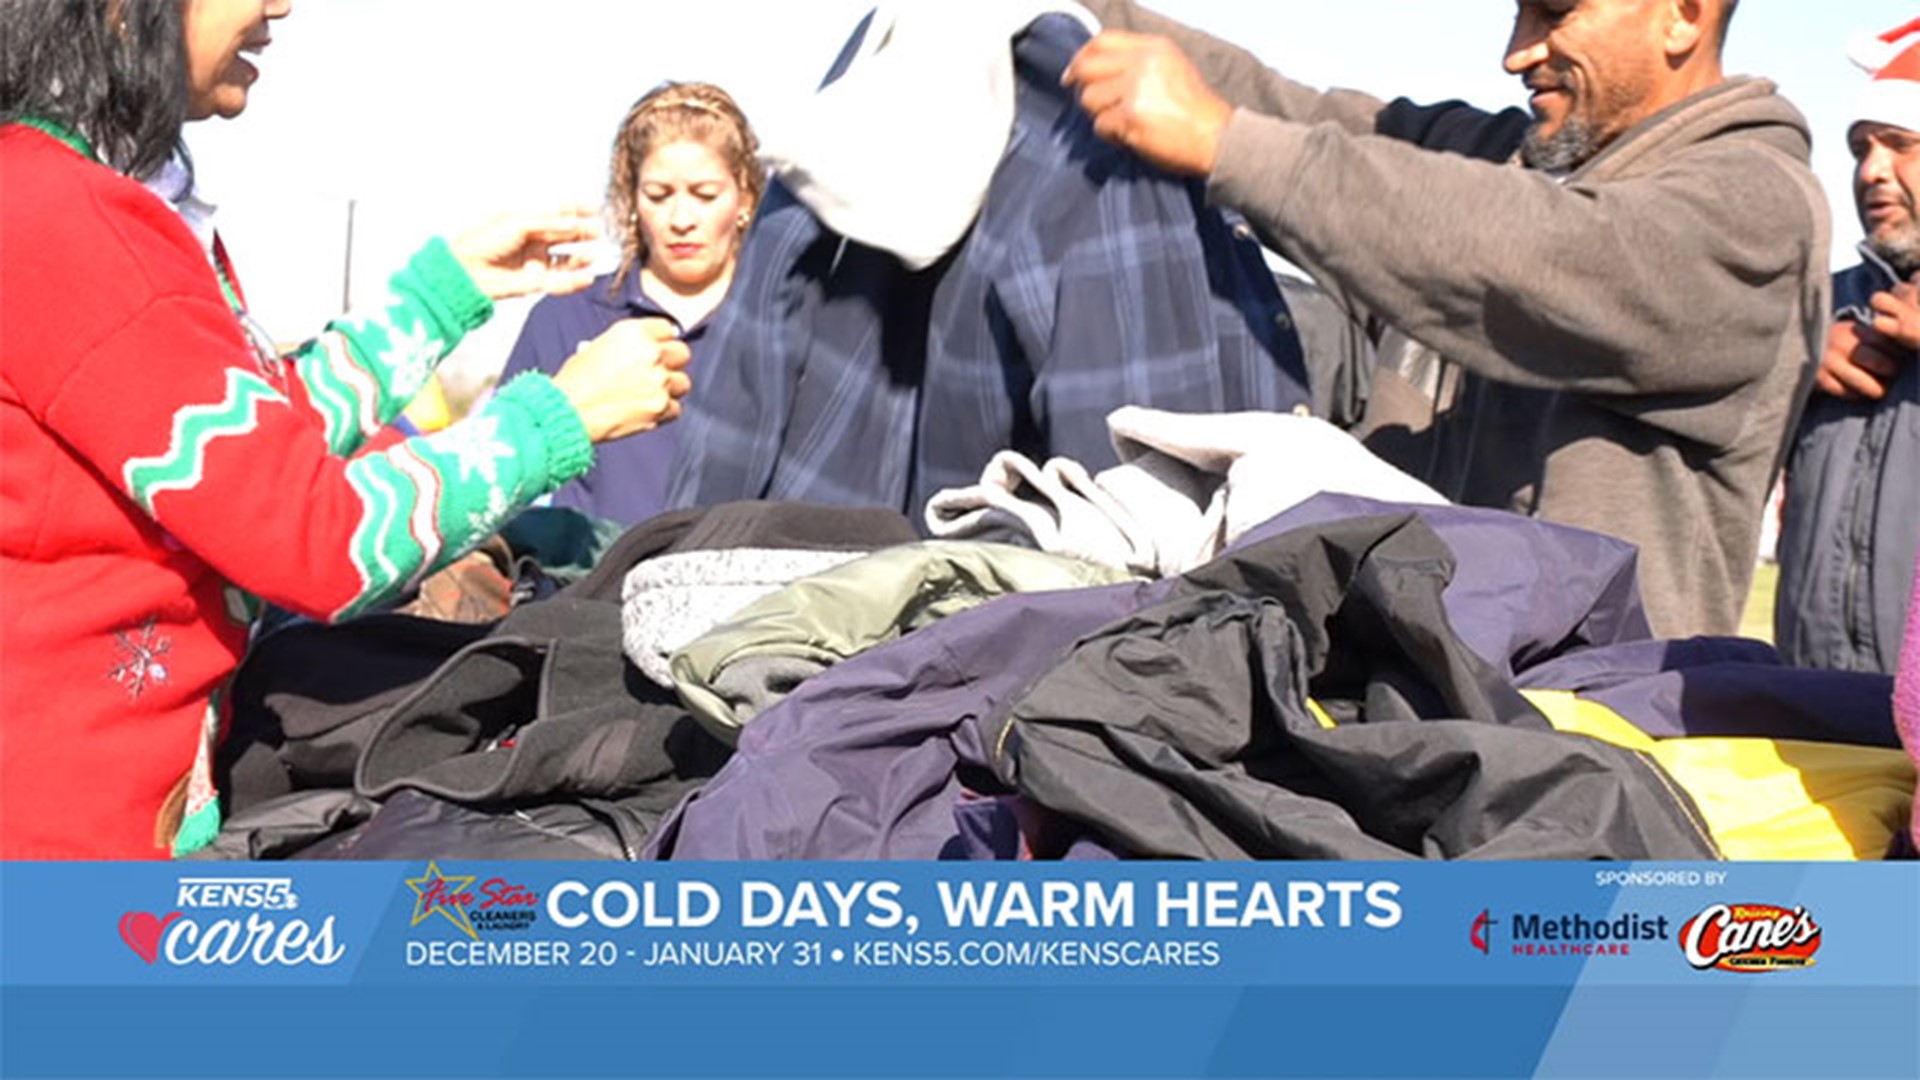 You can help people in our community warm up by supporting the Cold Days, Warm Hearts Winter Coat Drive.